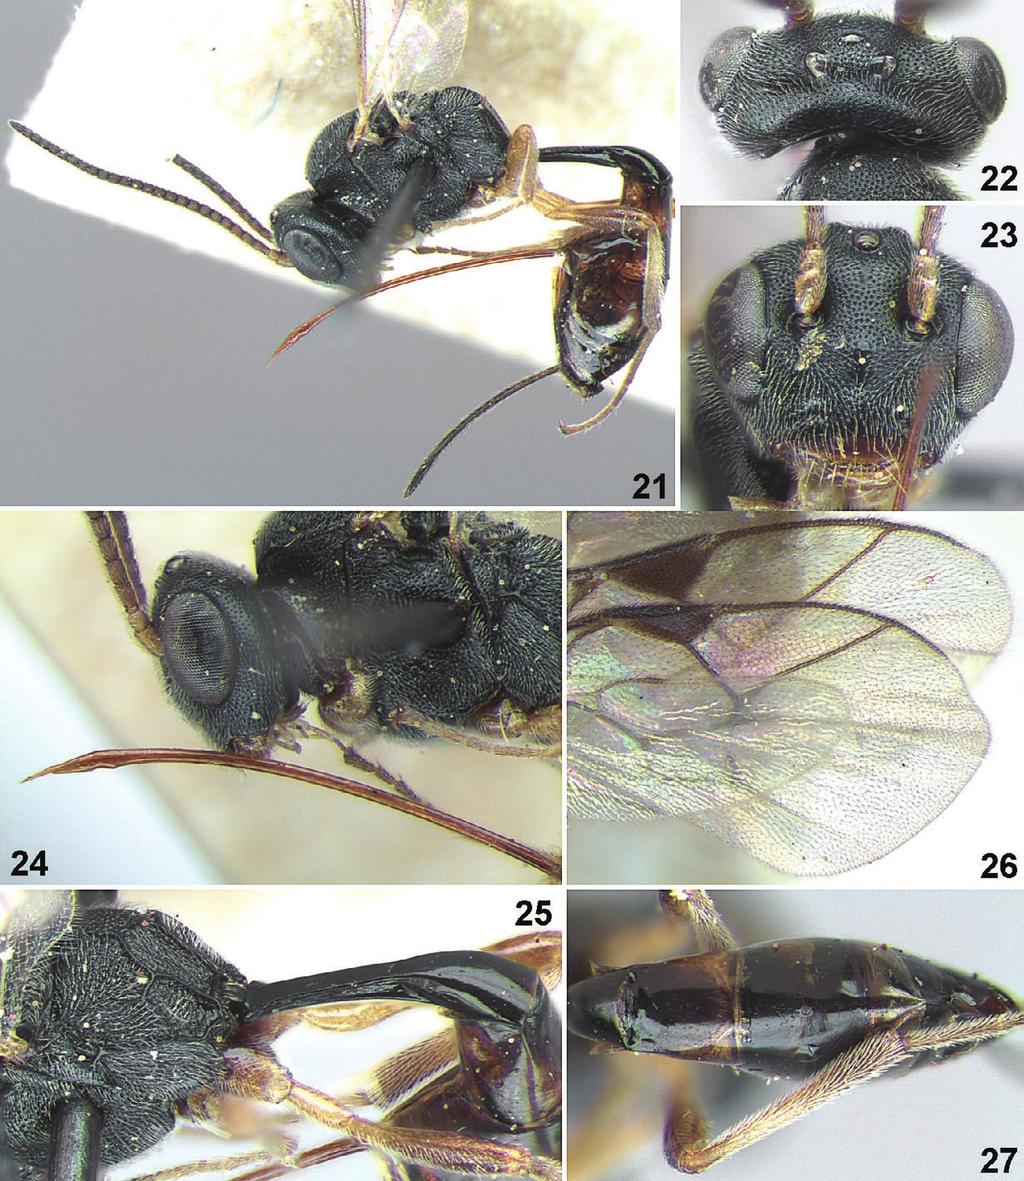 140 AFRICAN INVERTEBRATES, vol. 54 (1), 2013 much longer than lower tooth. Malar space as long as basal width of mandible. Clypeus 2.